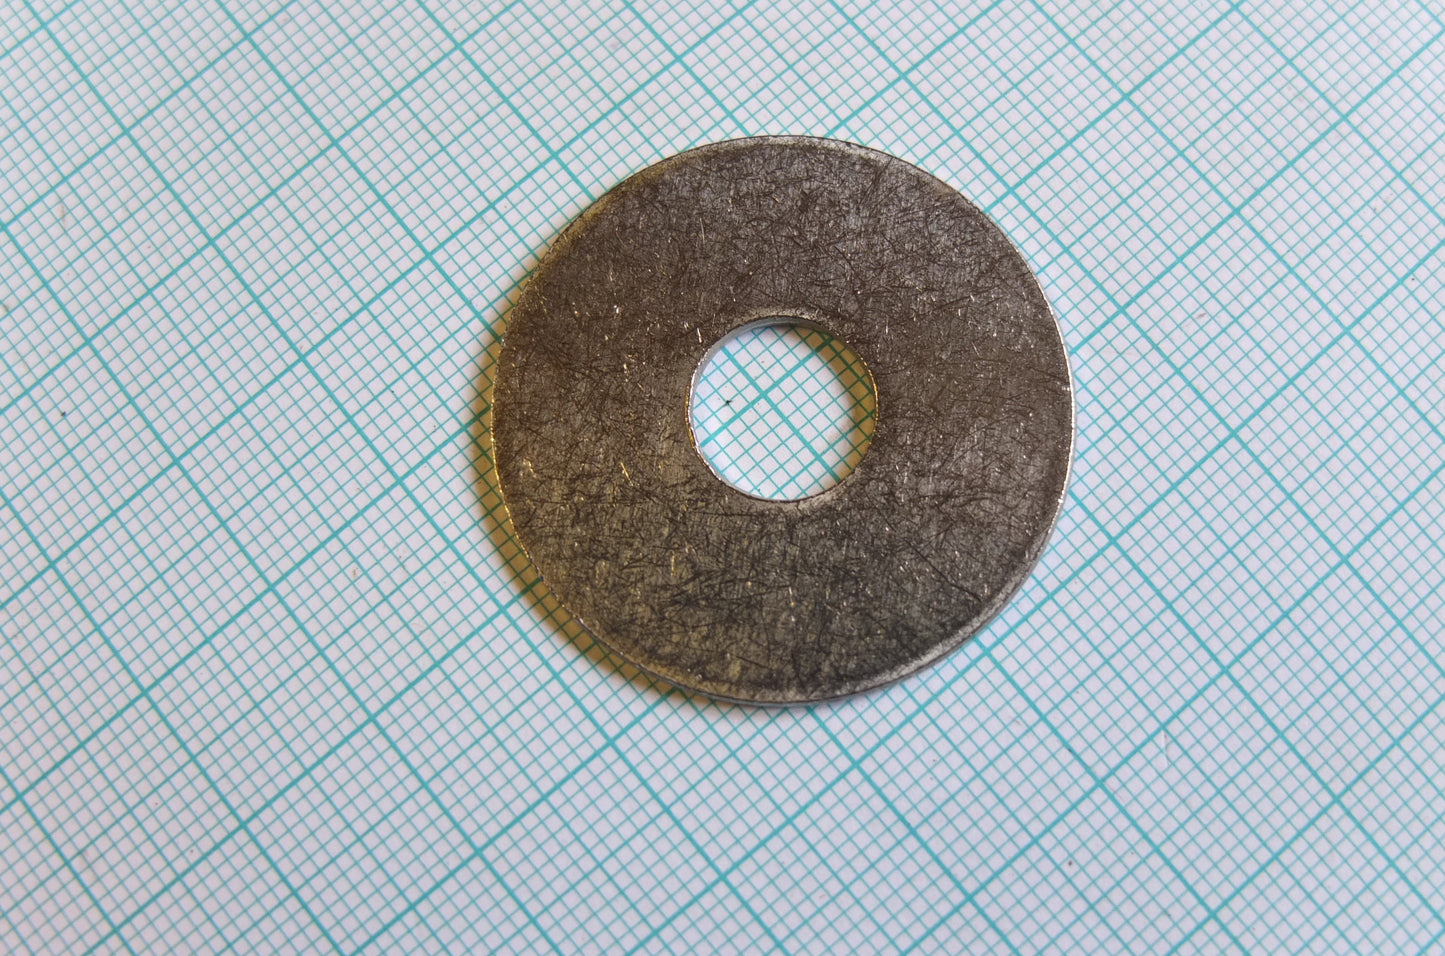 P4/011 Tank rubber support washer